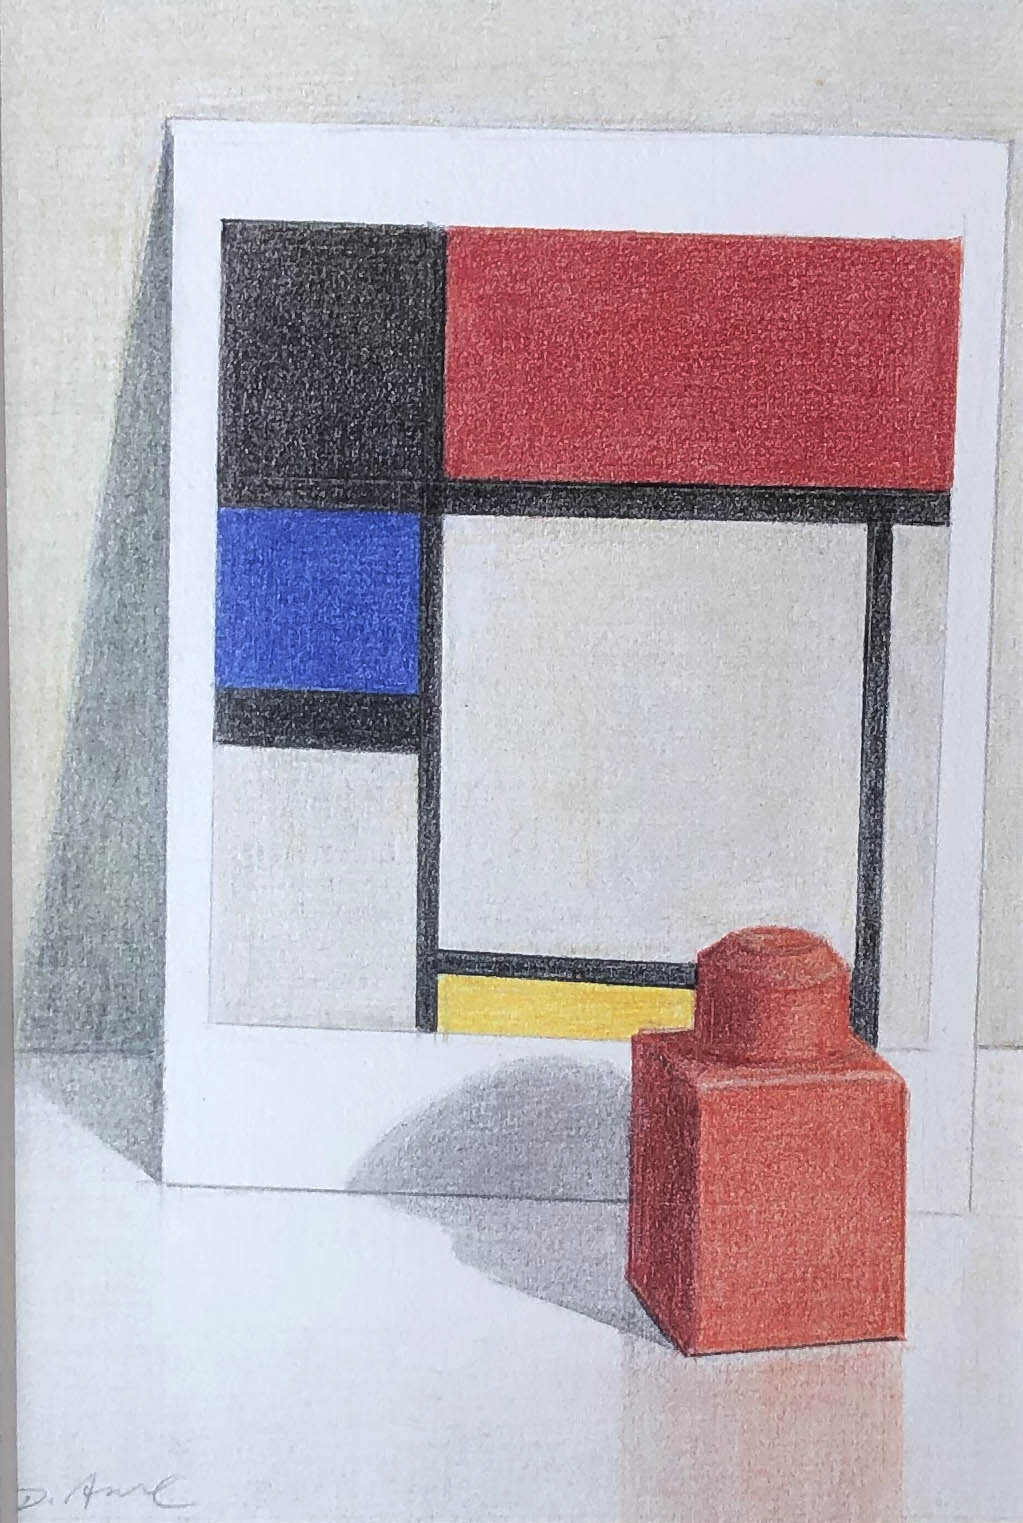 Lego with Mondrian (SOLD)